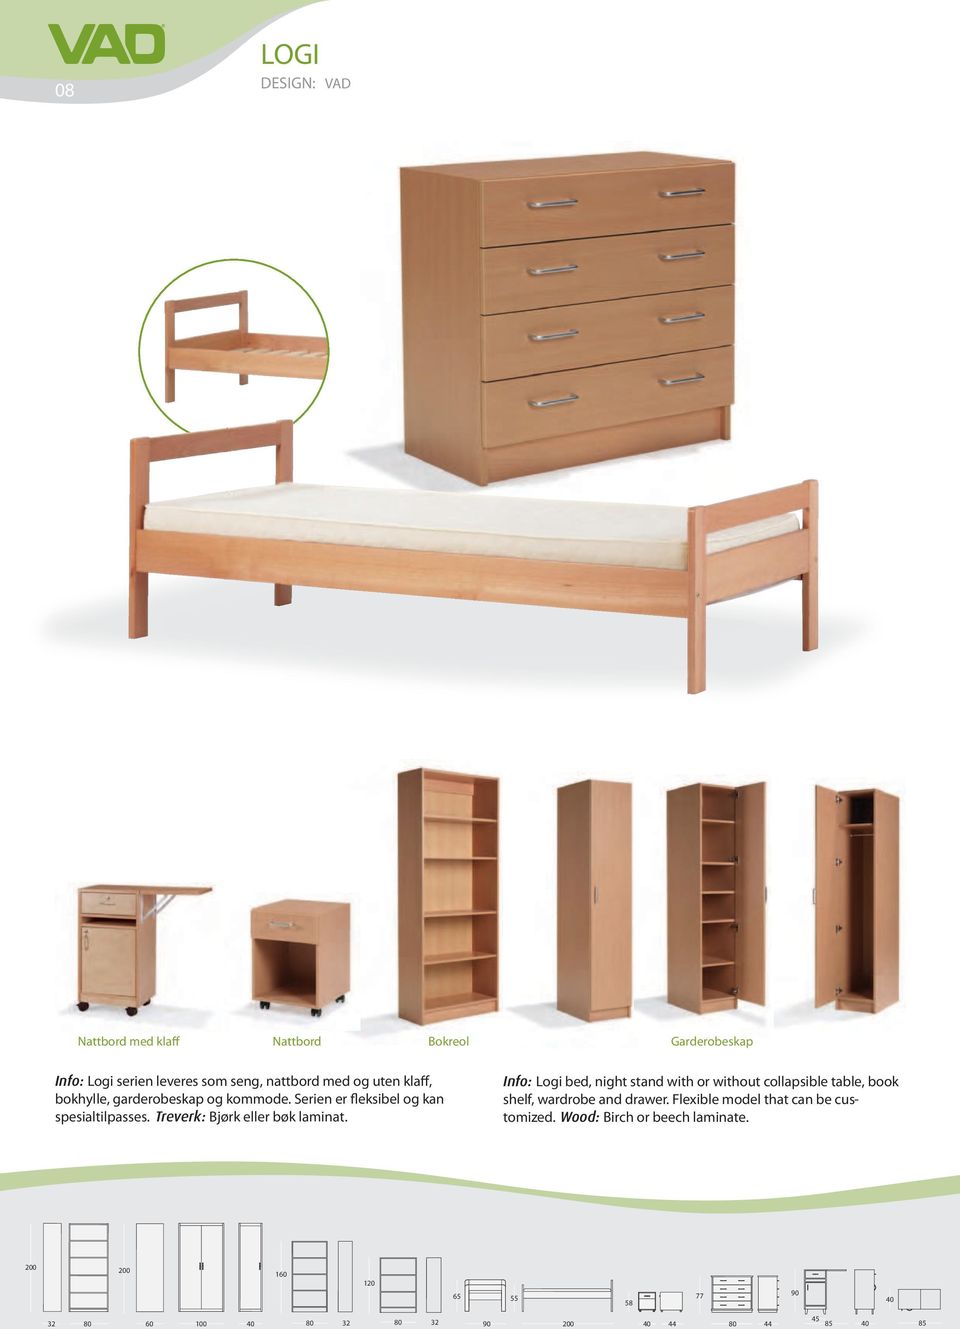 Info: Logi bed, night stand with or without collapsible table, book shelf, wardrobe and drawer.